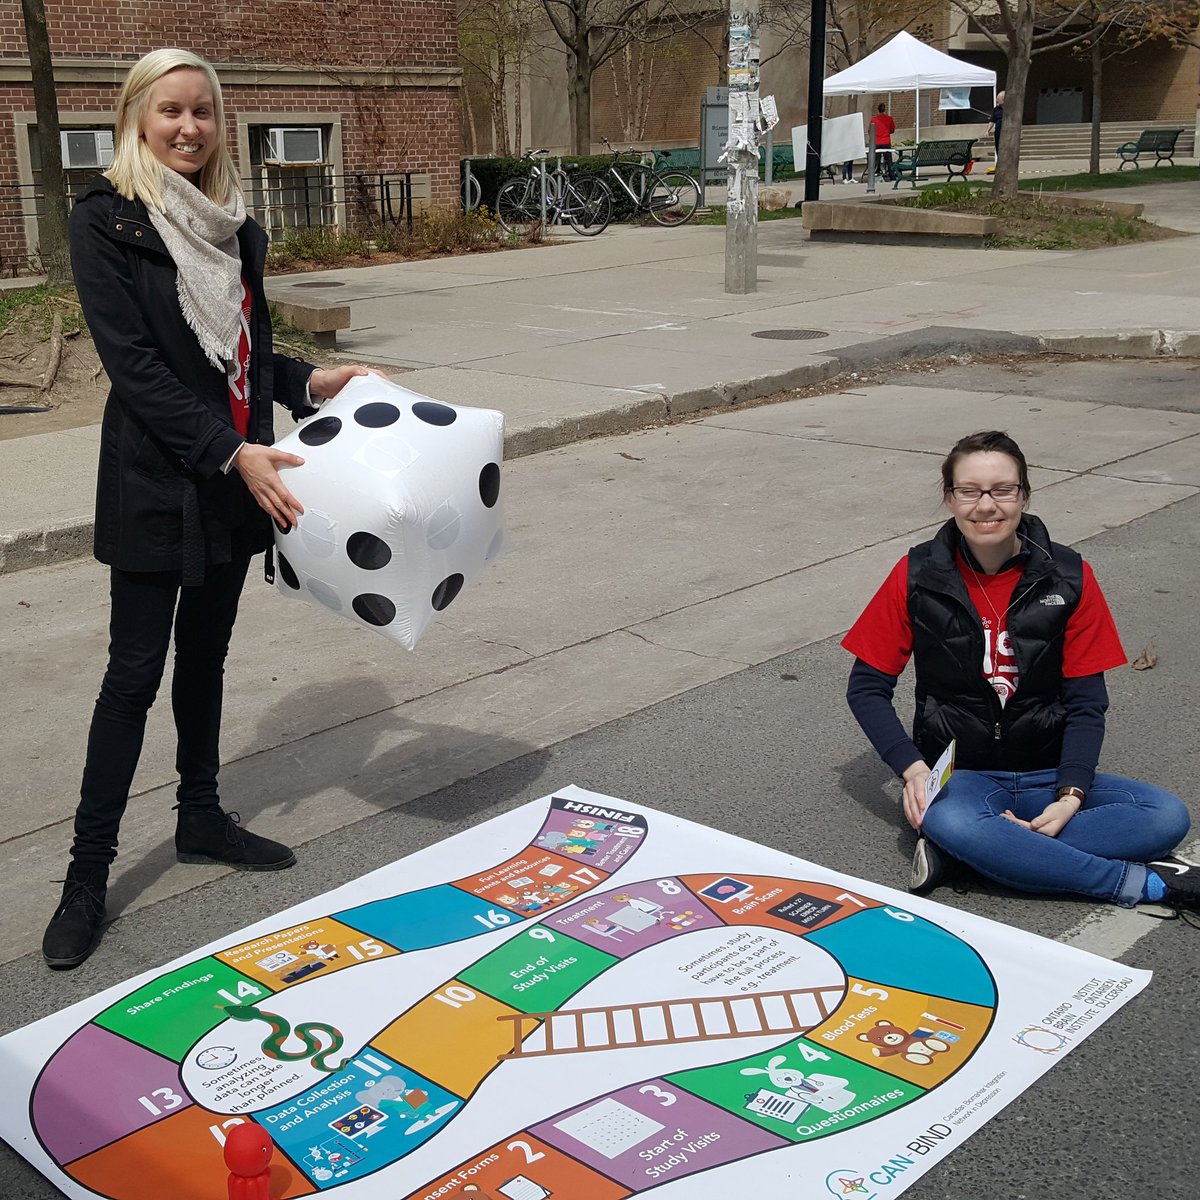 Clinical trials have their ups and downs, just like a game. Come try our life-size #ClinicalTrials101 board game and learn about the most important steps in a research study #CANBINDSR #SciRen #FullSTEAMahead